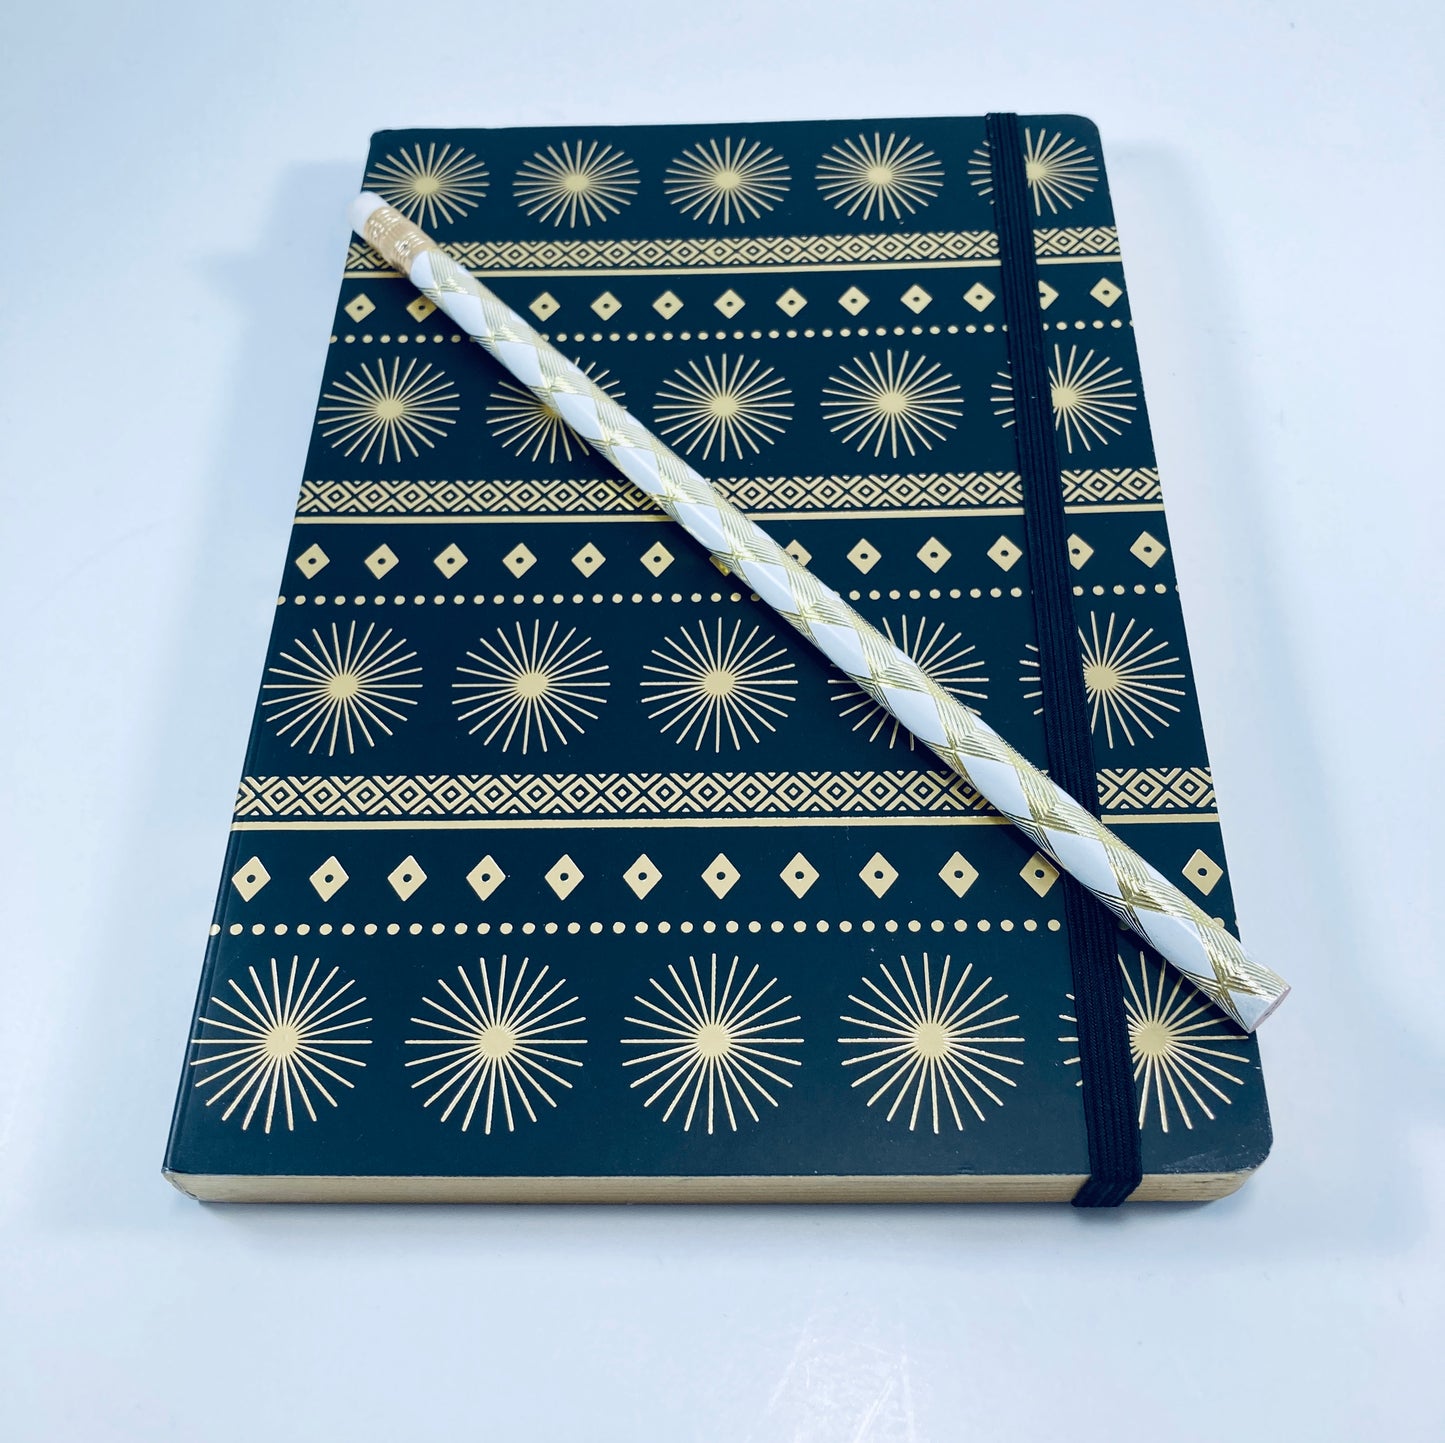 Black bound journal features starbursts and diamonds accented in gold.  A great addition to any desk, bag, backpack, or office.  